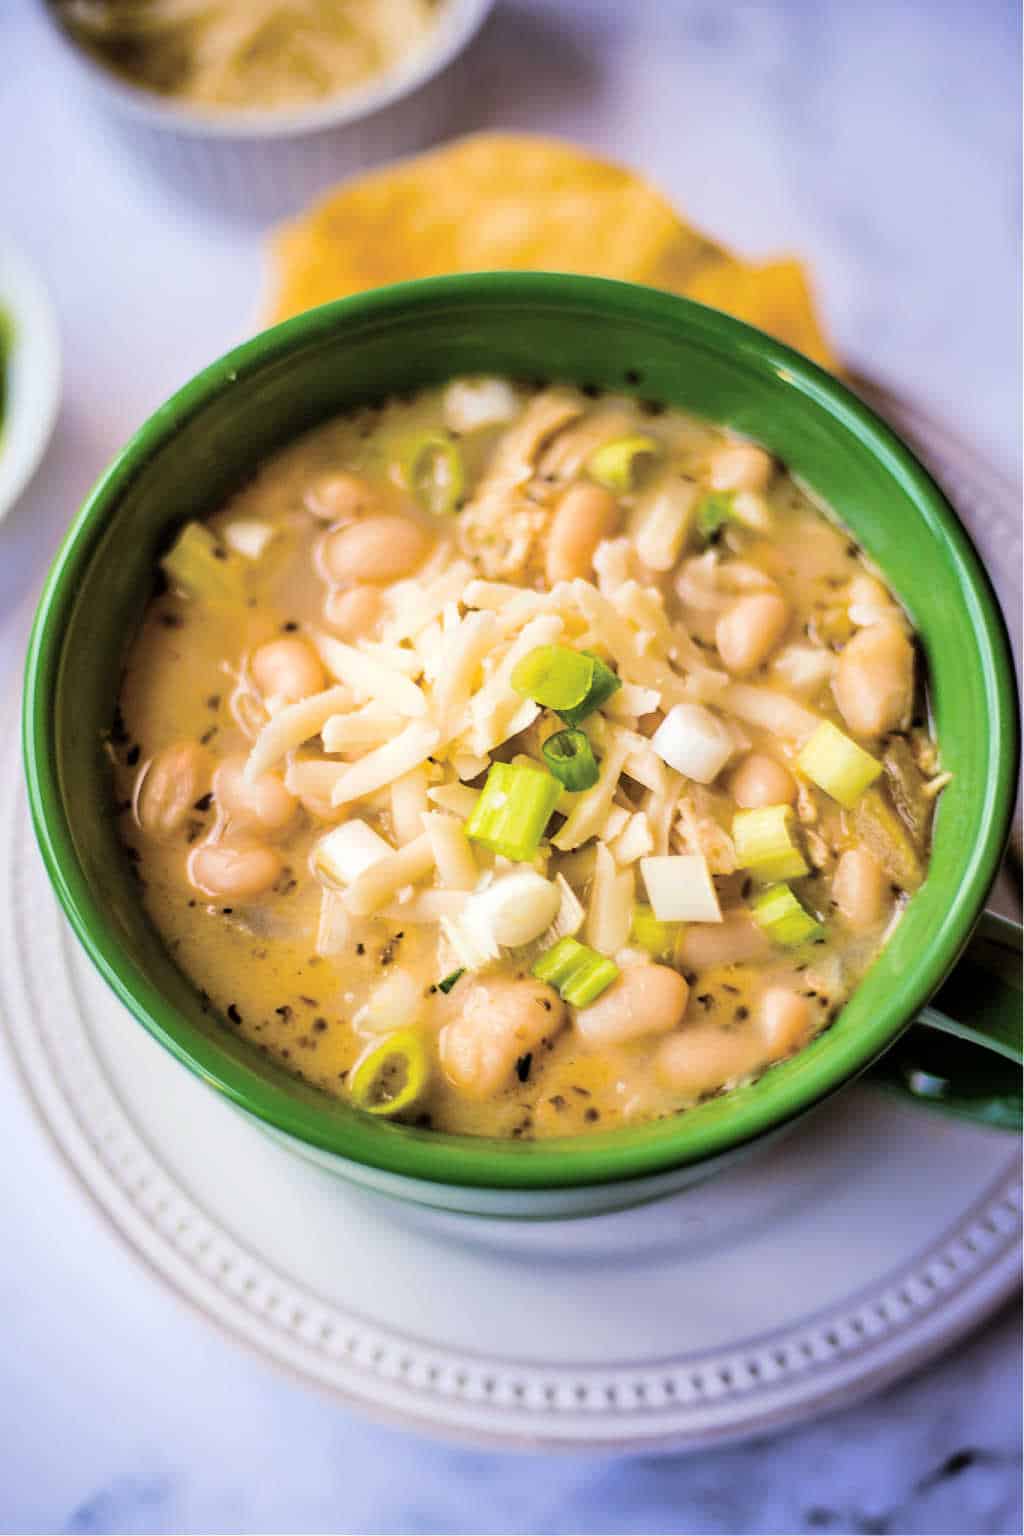 white chicken chili in a green soup bowl